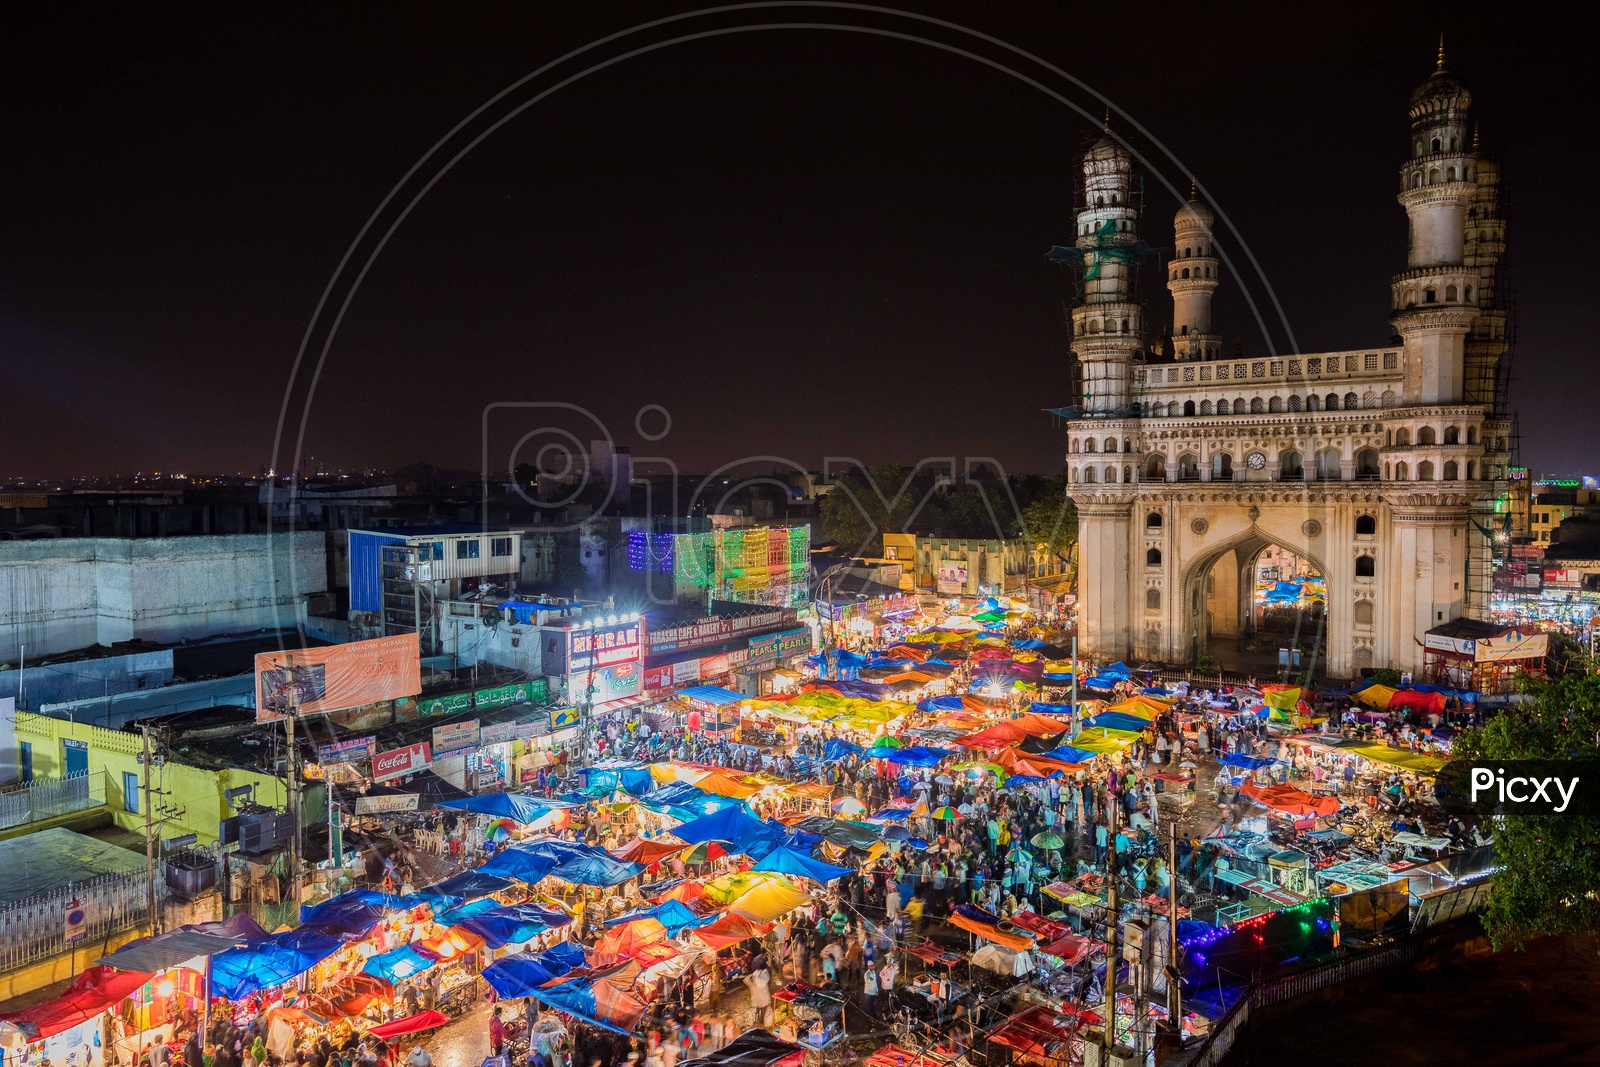 View of Crowd during the night in street bazaar with charminar in background